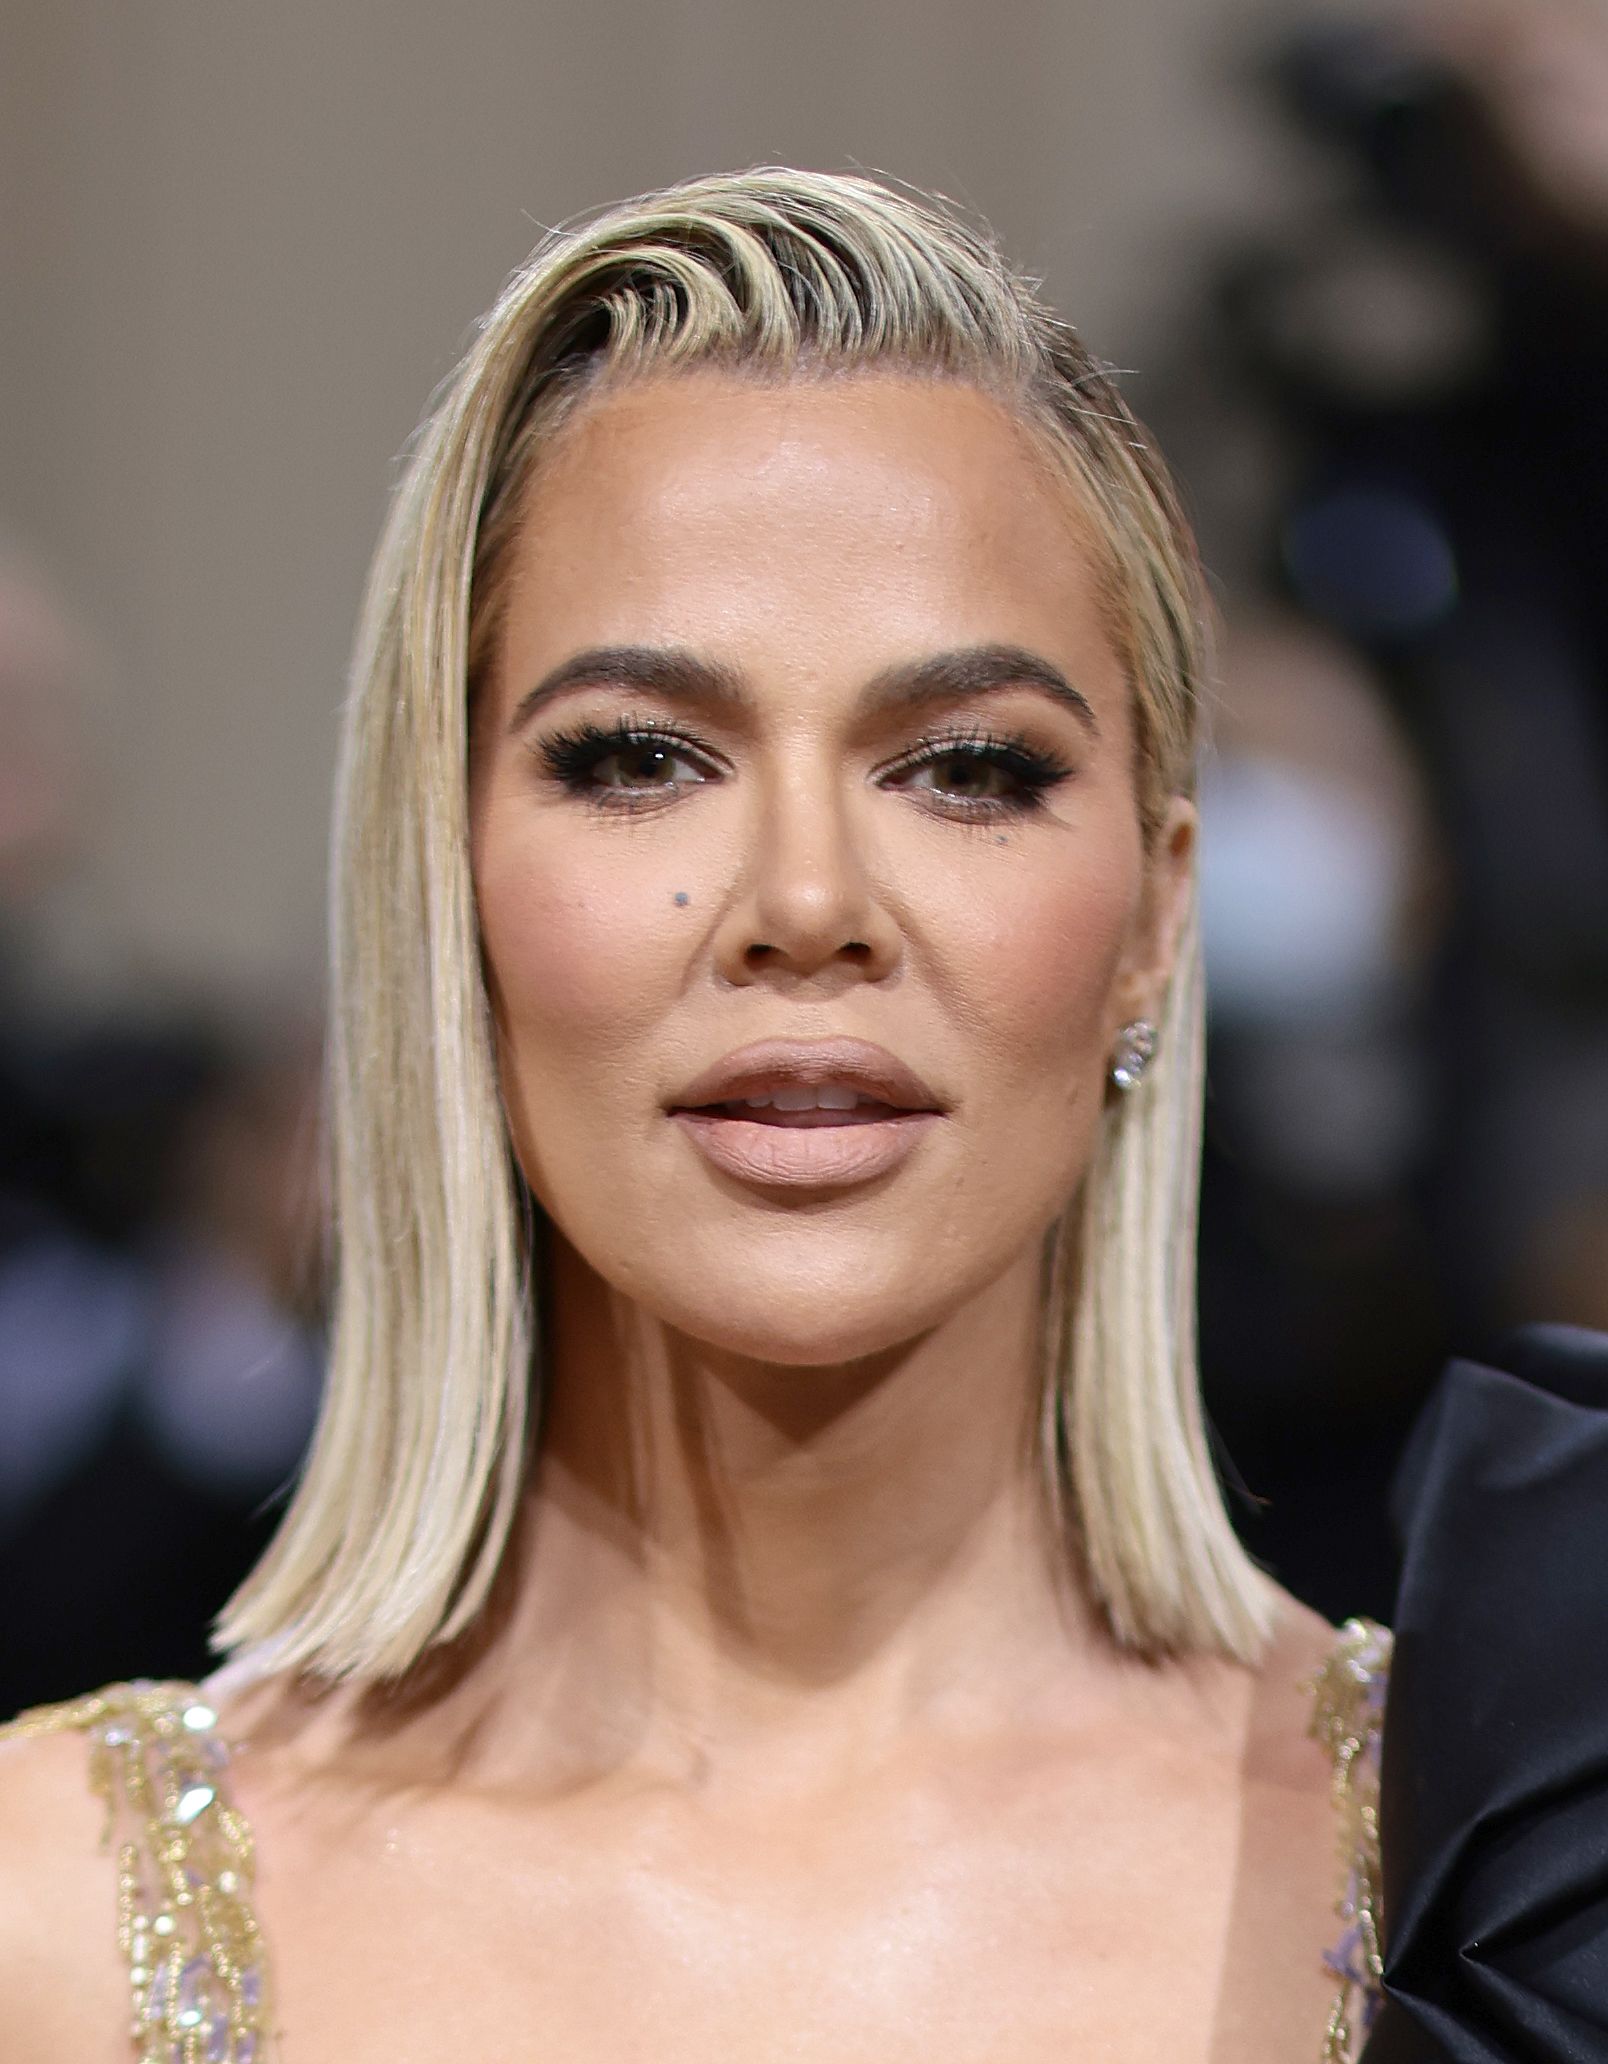 Khloe Kardashian looks unrecognizable as she debuts new blond hair after  being 'banned' from the Met Gala